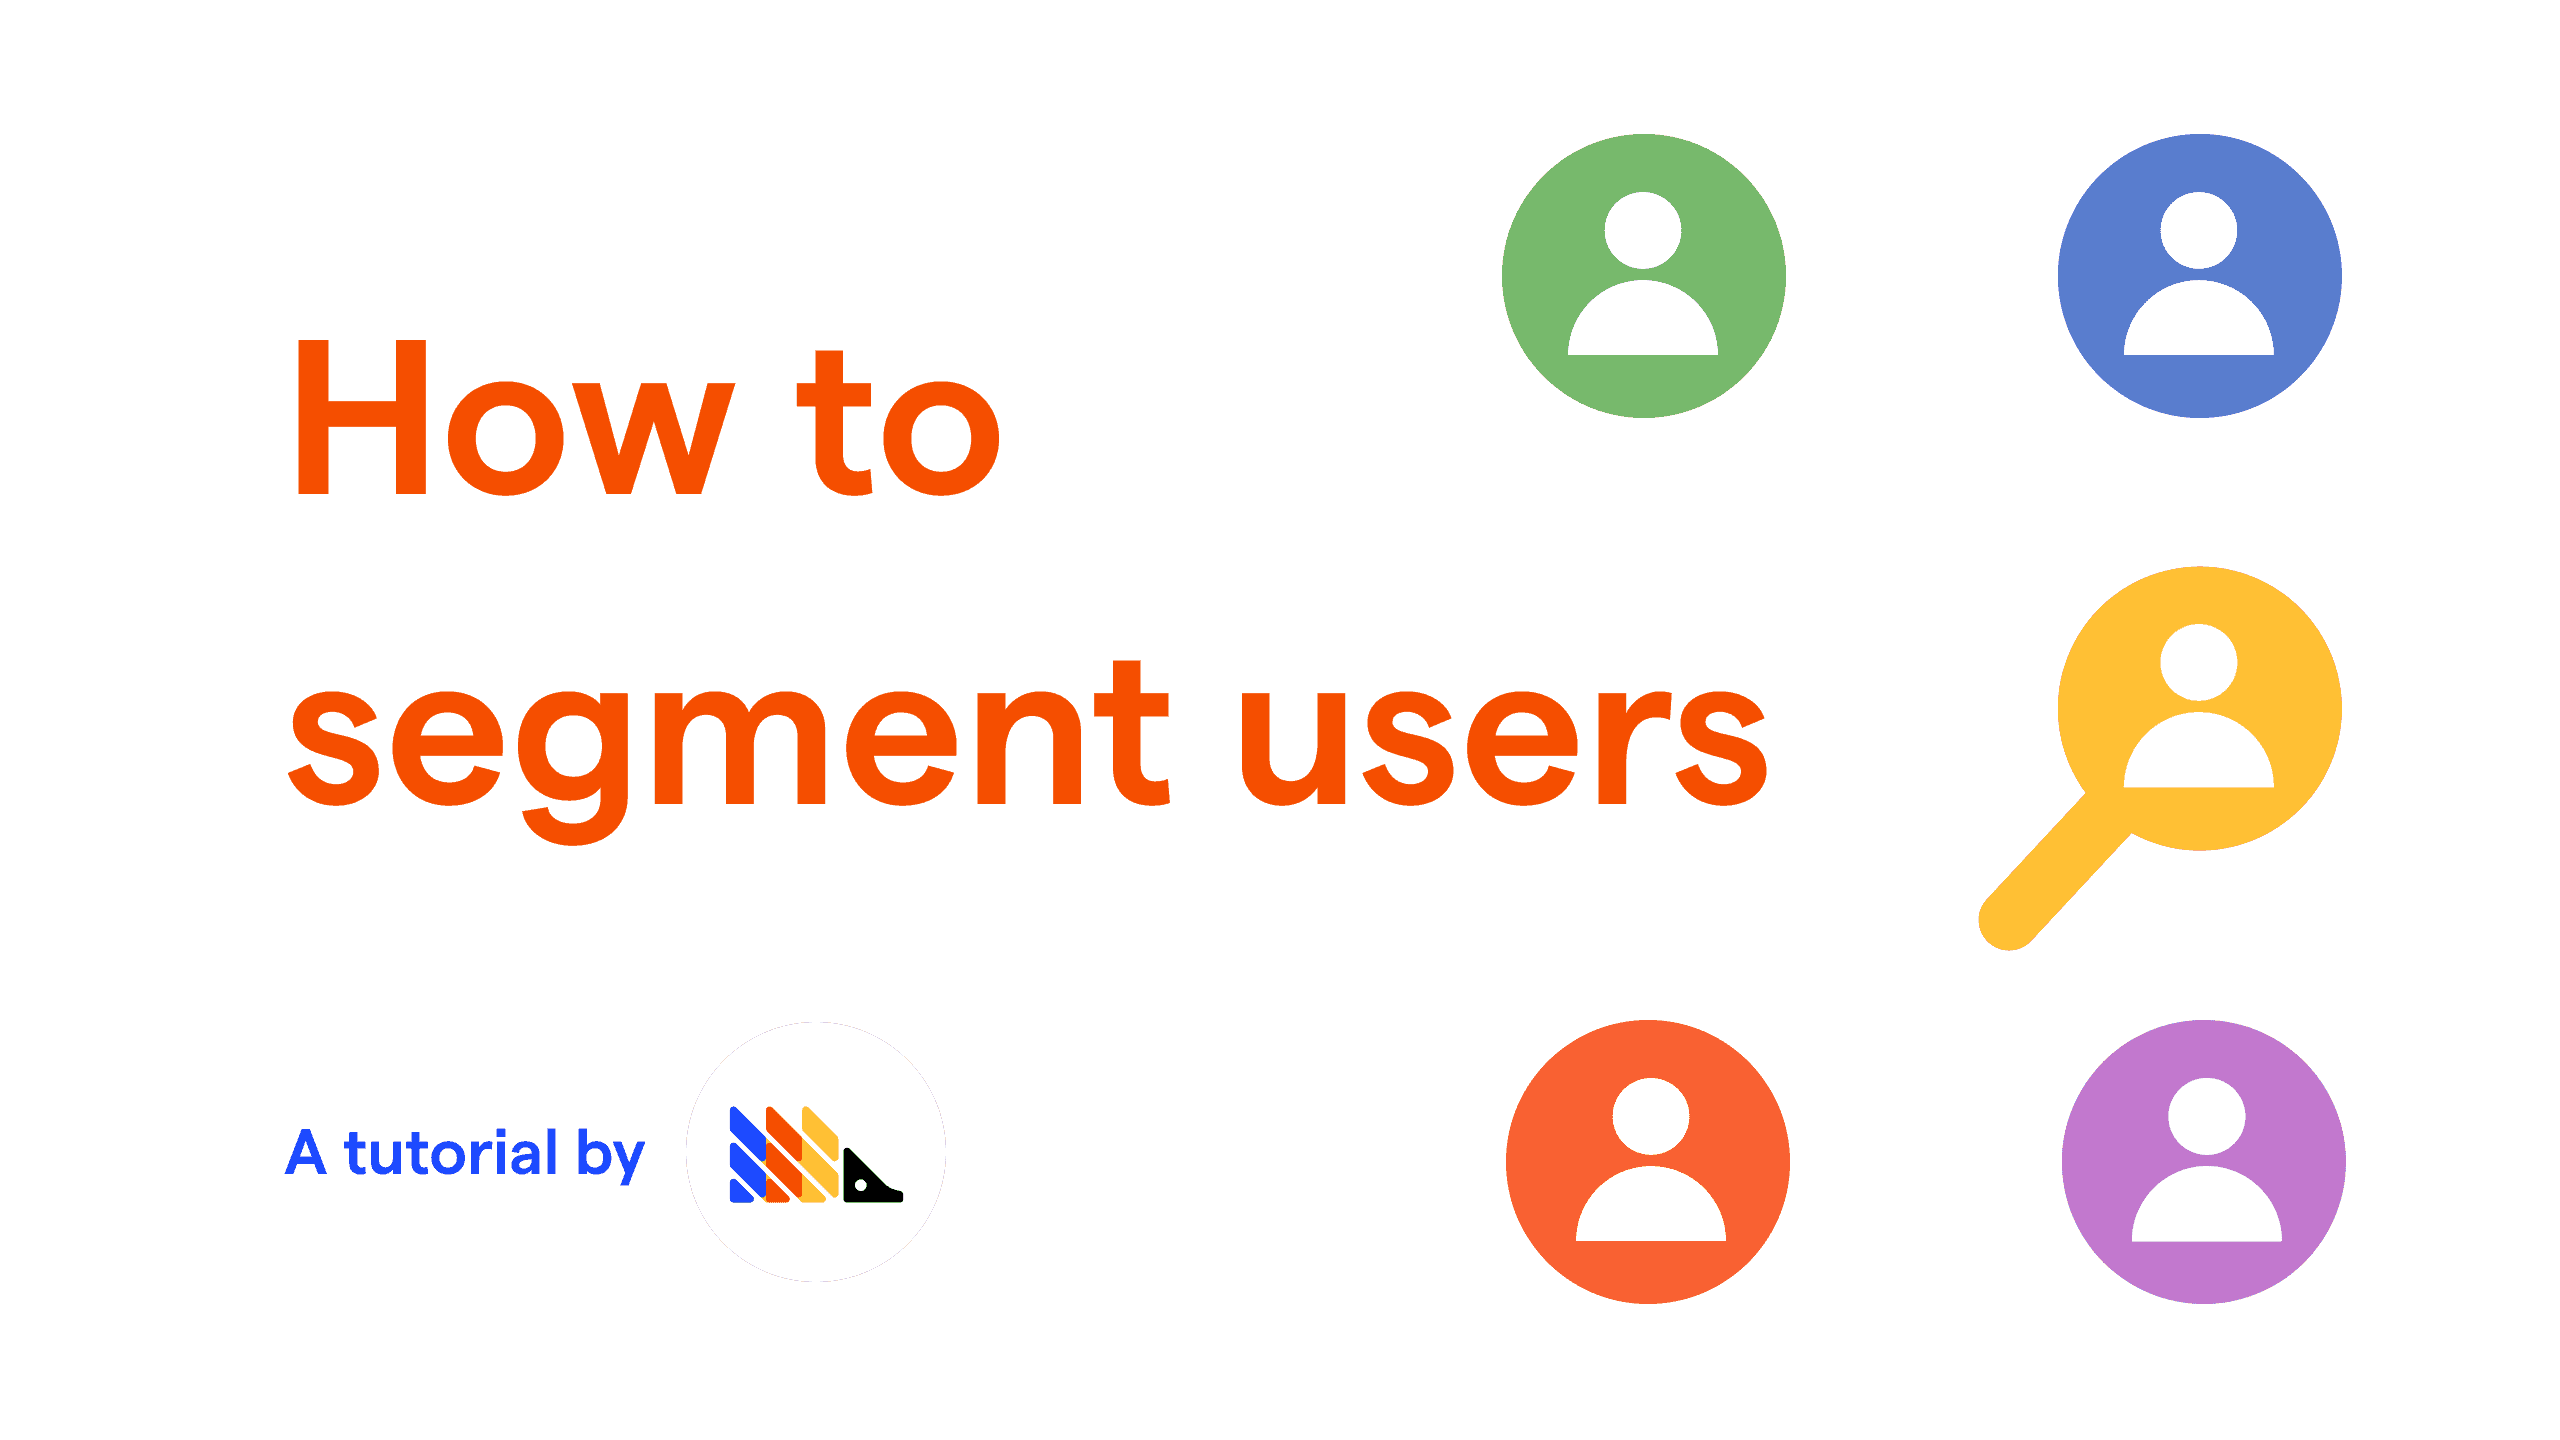 How to segment users